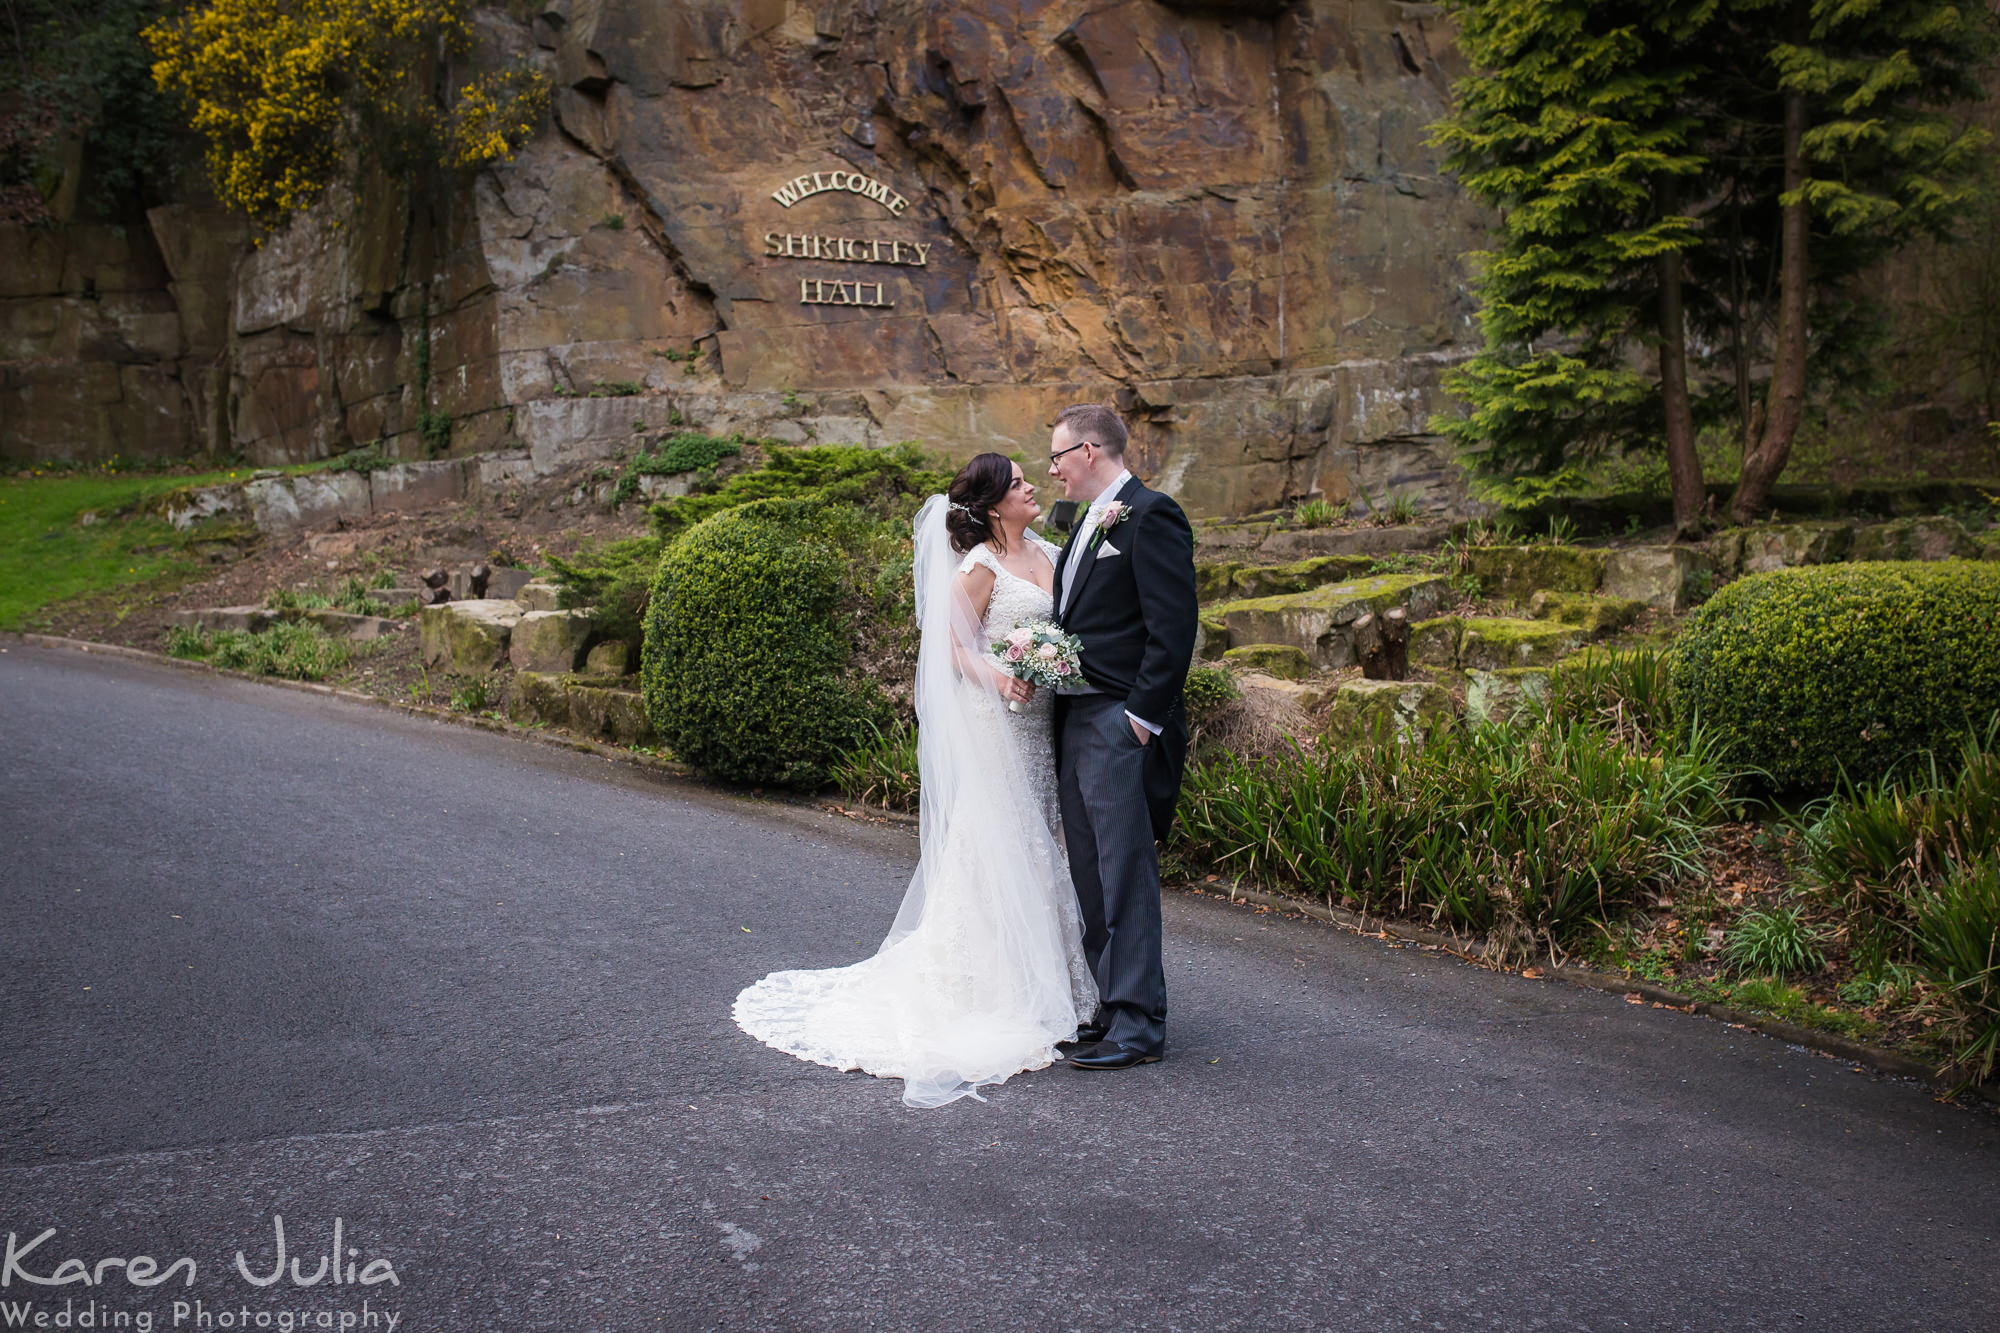 bride and groom portrait at the entrance to Shrigley Hall